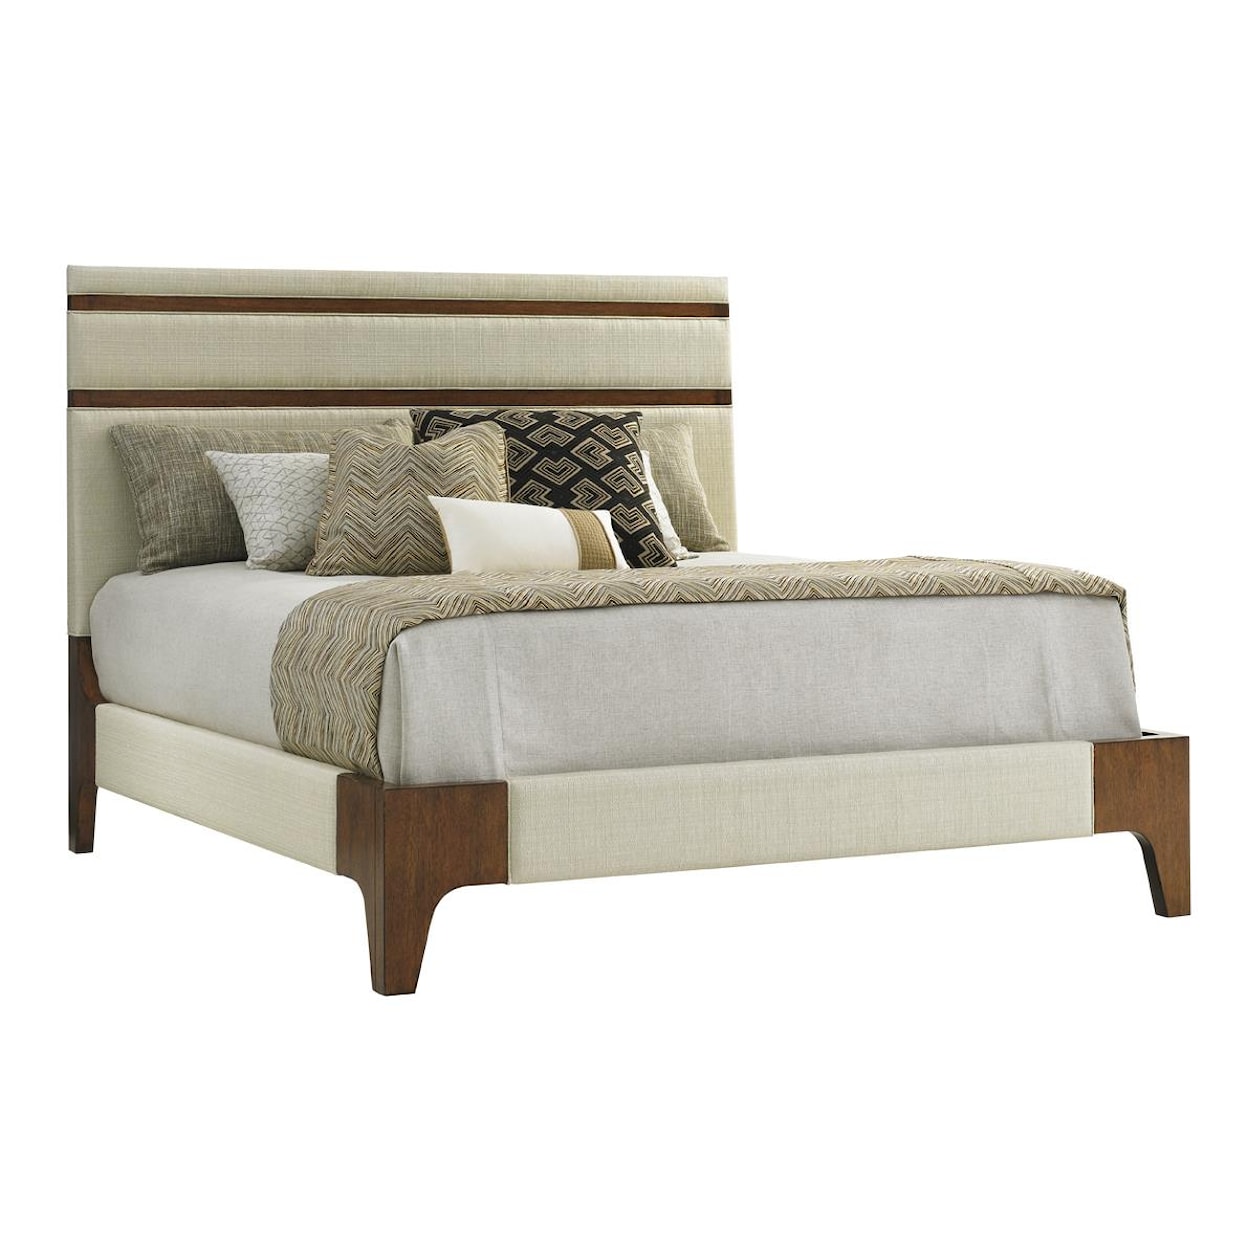 Tommy Bahama Home Island Fusion Mandarin Upholstered Panel Bed 5/0 Queen